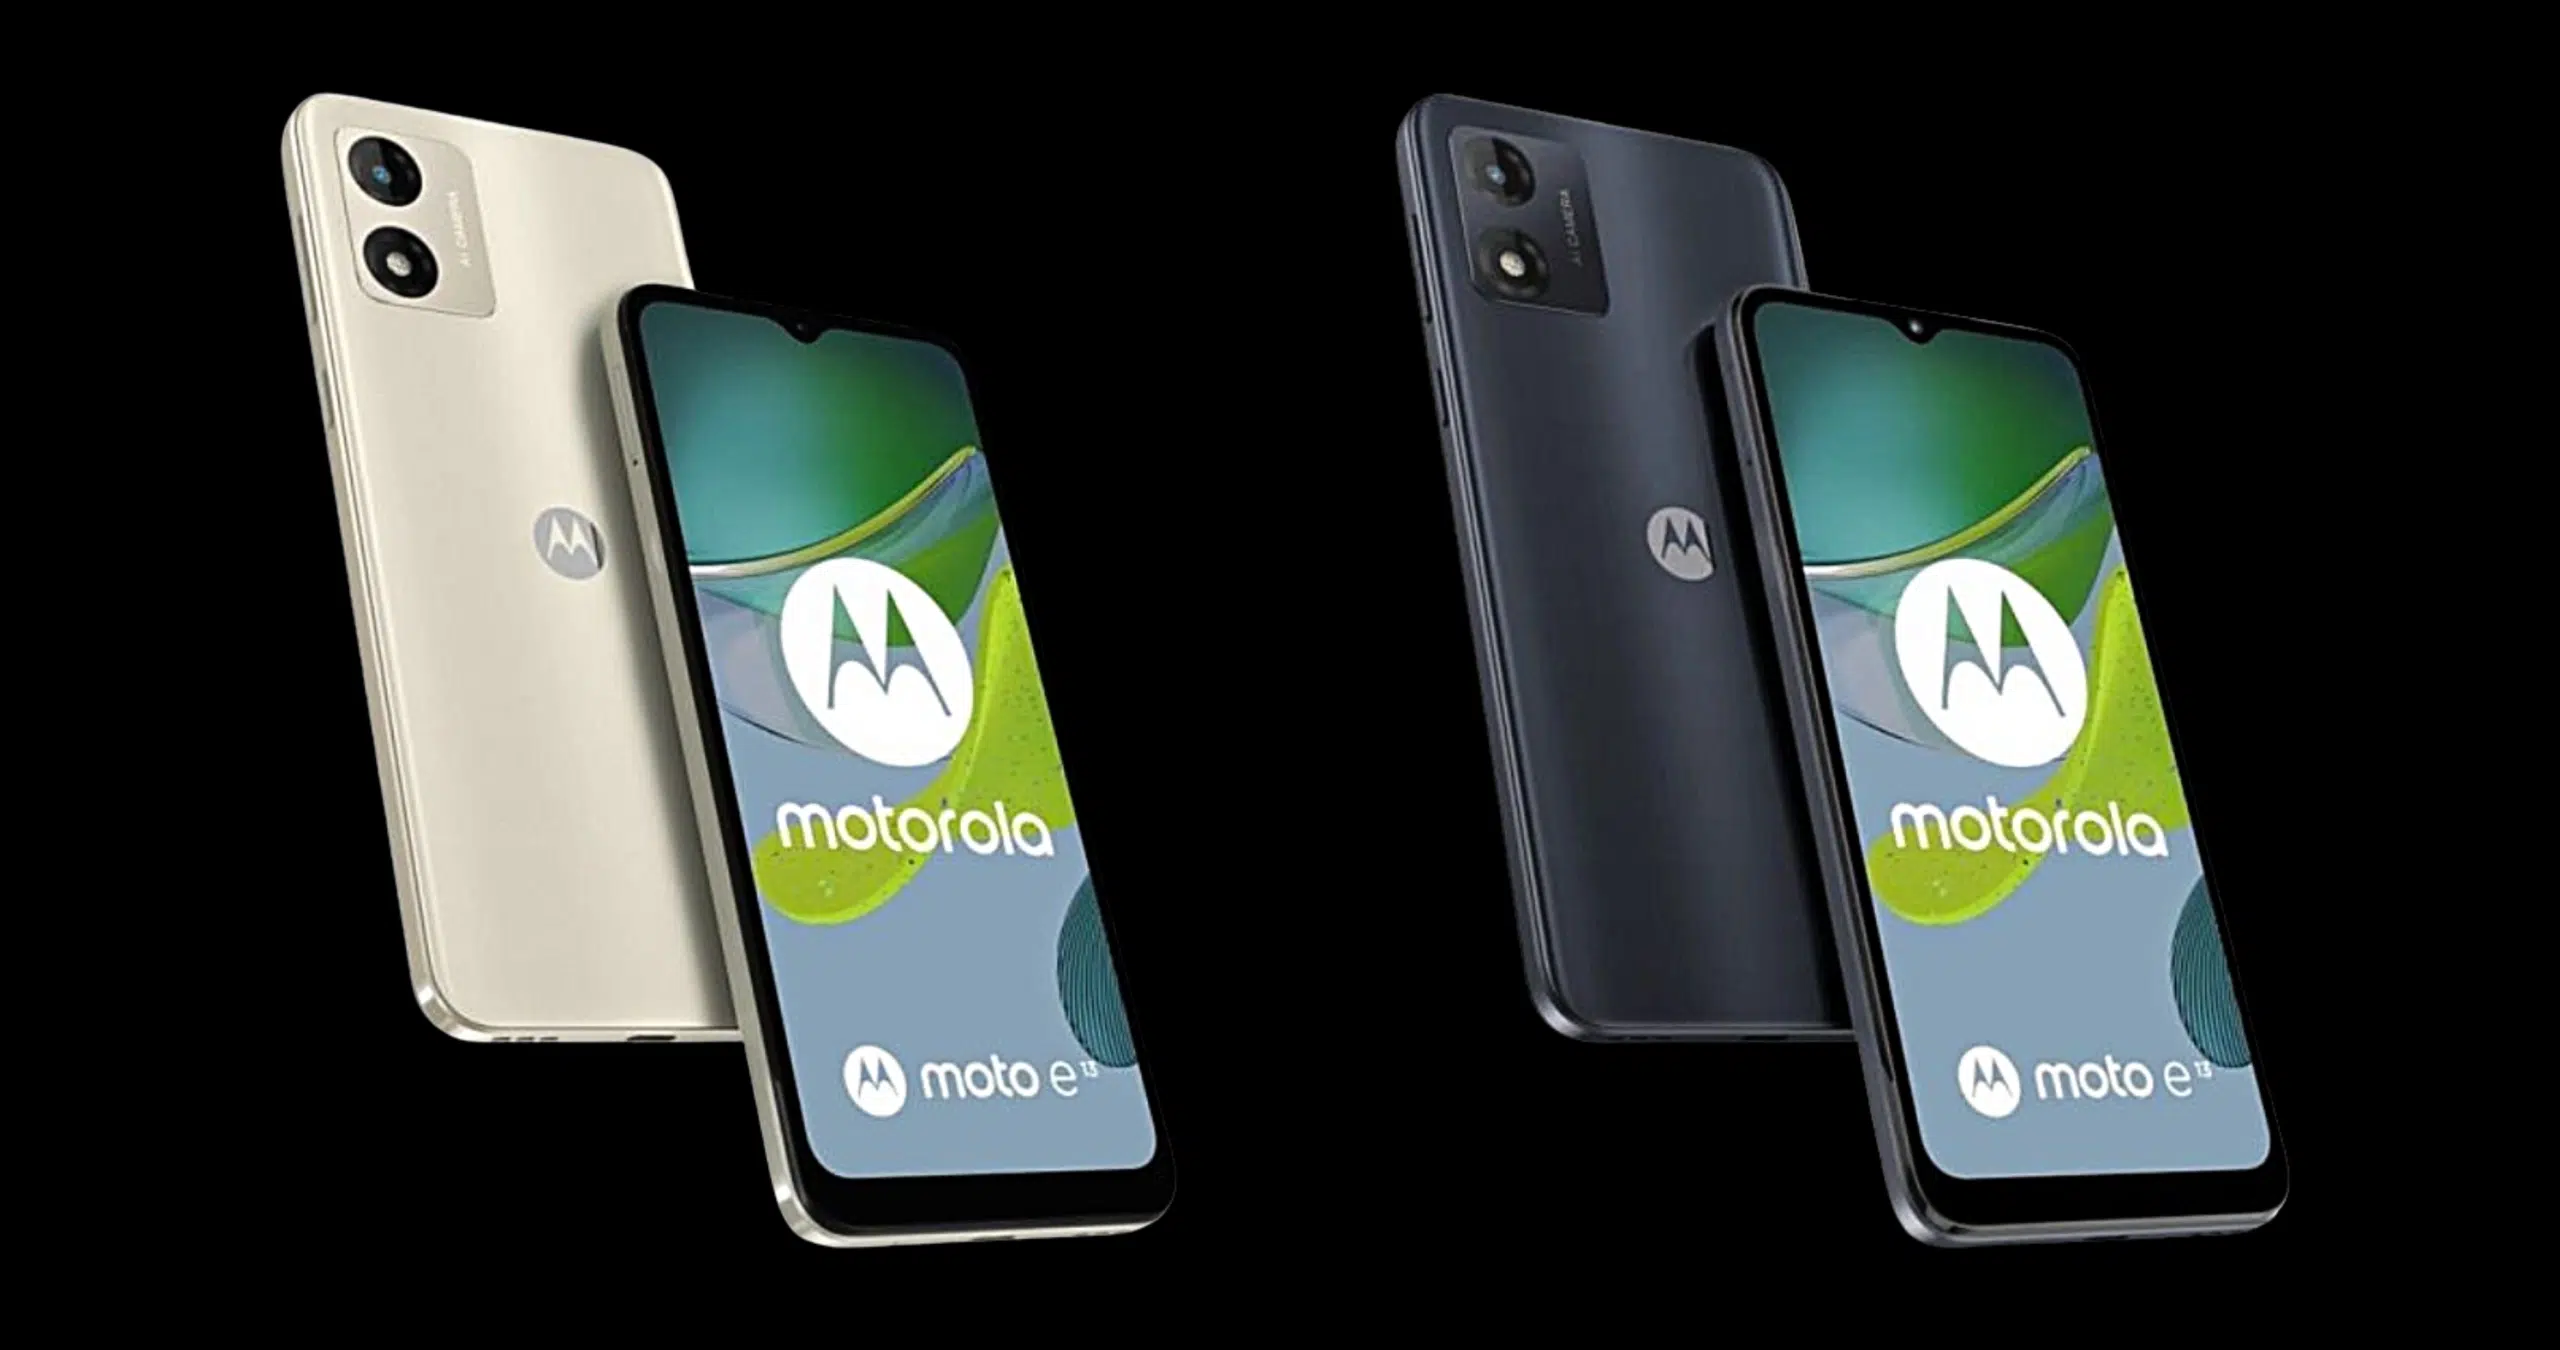 Moto e13 is launched in India